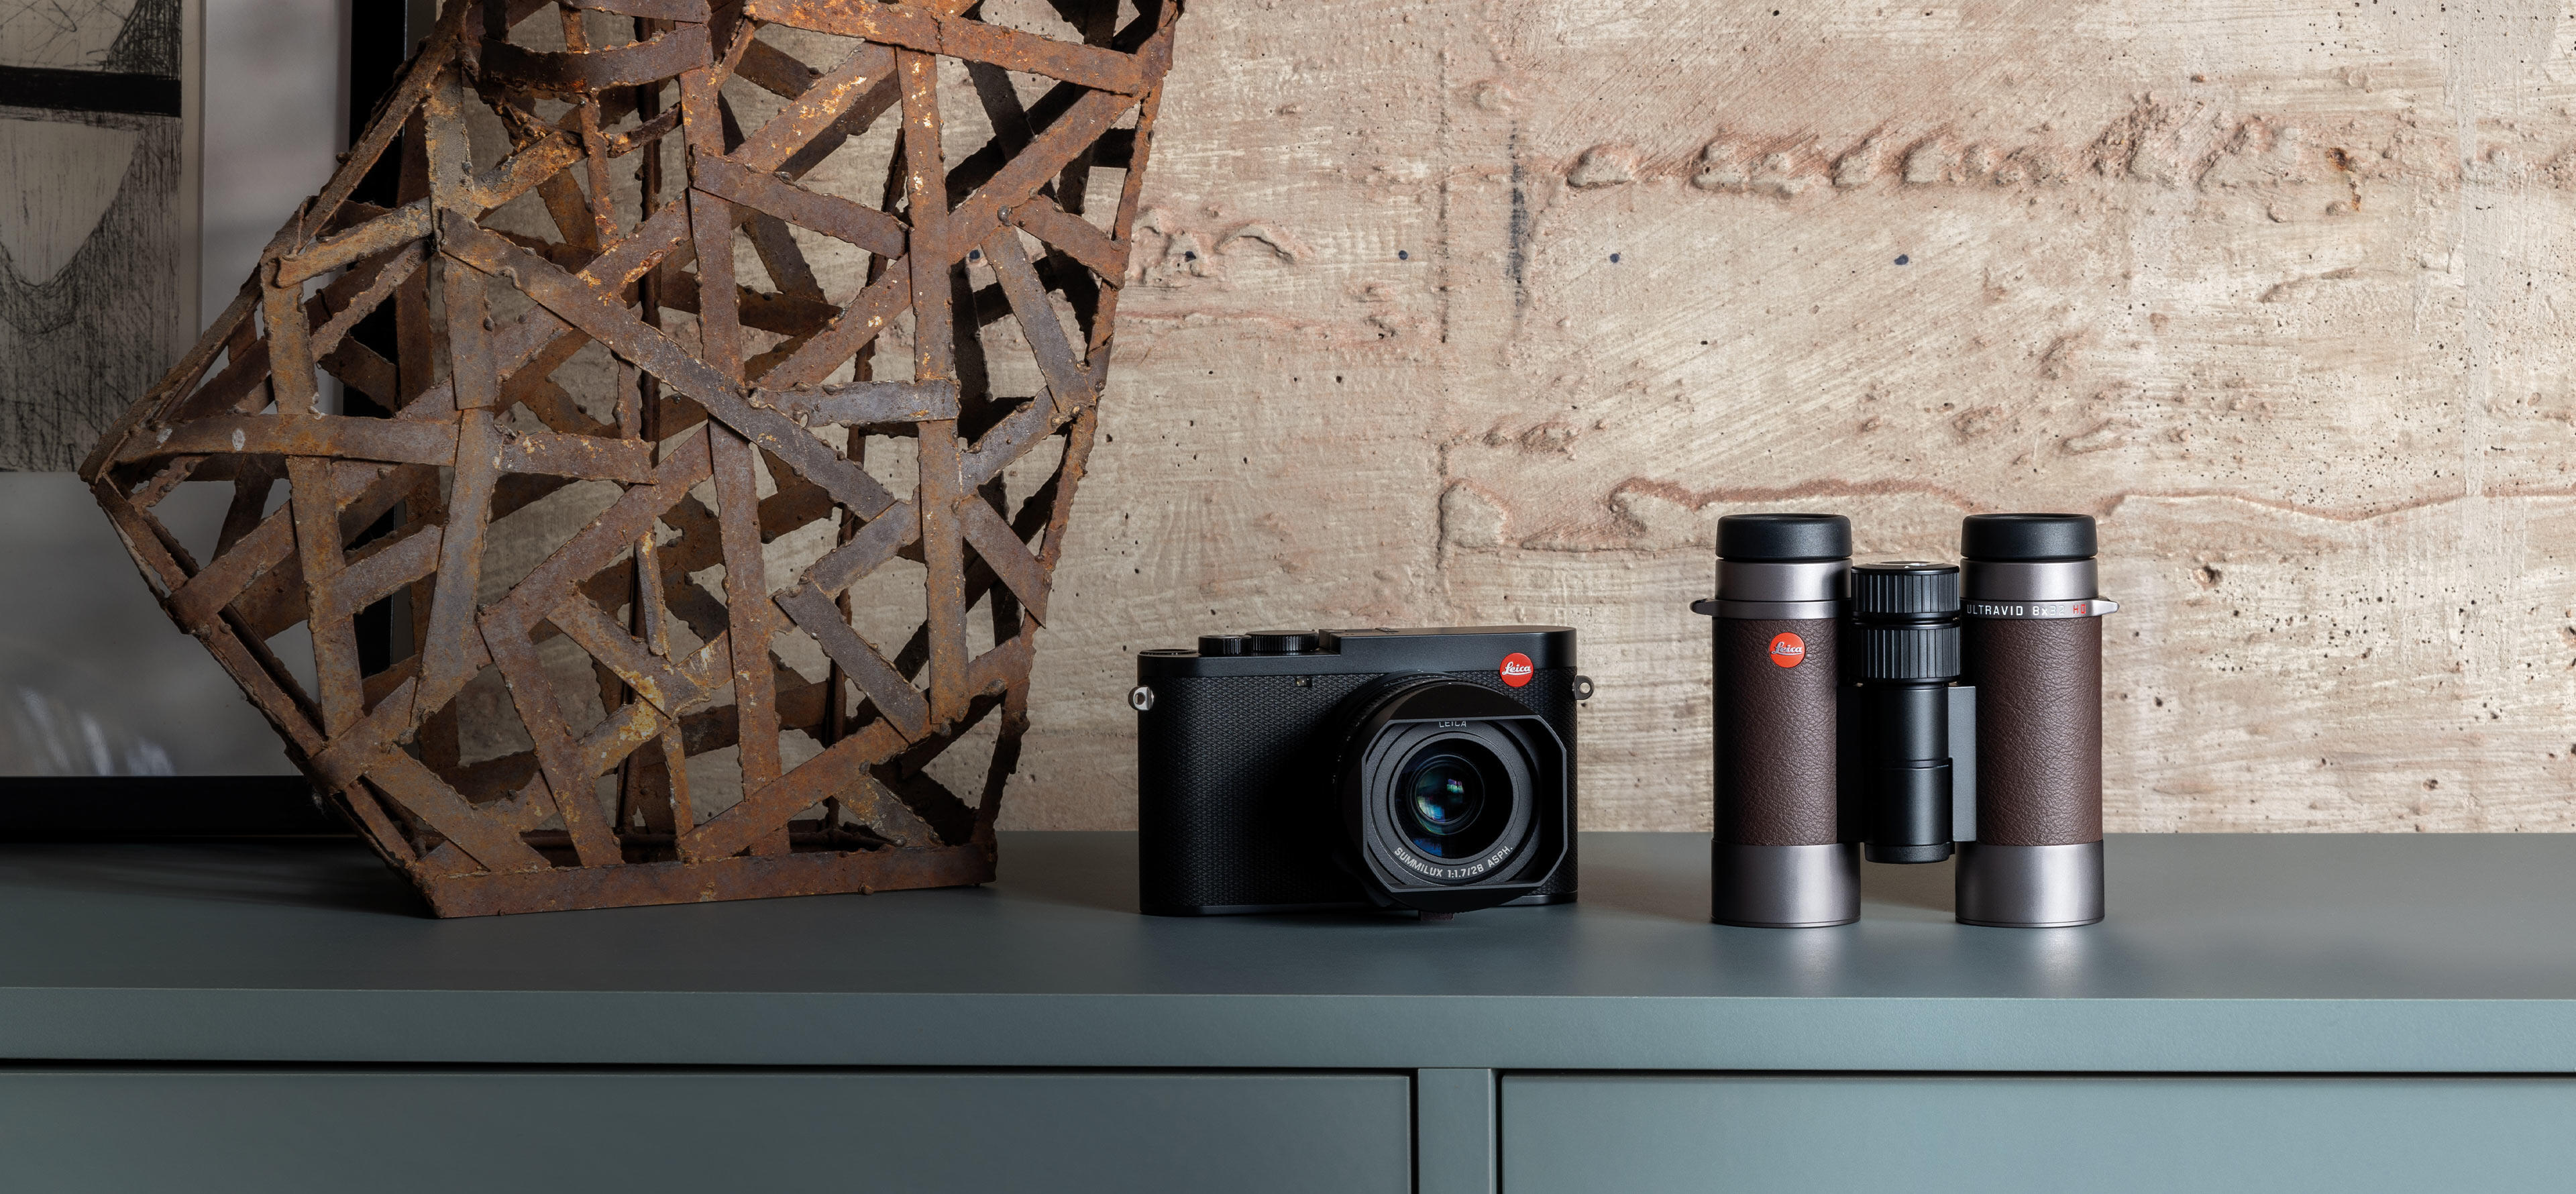 40099_leica-ultravid-8x32-hd-plus-customized-special-edition_hero-image